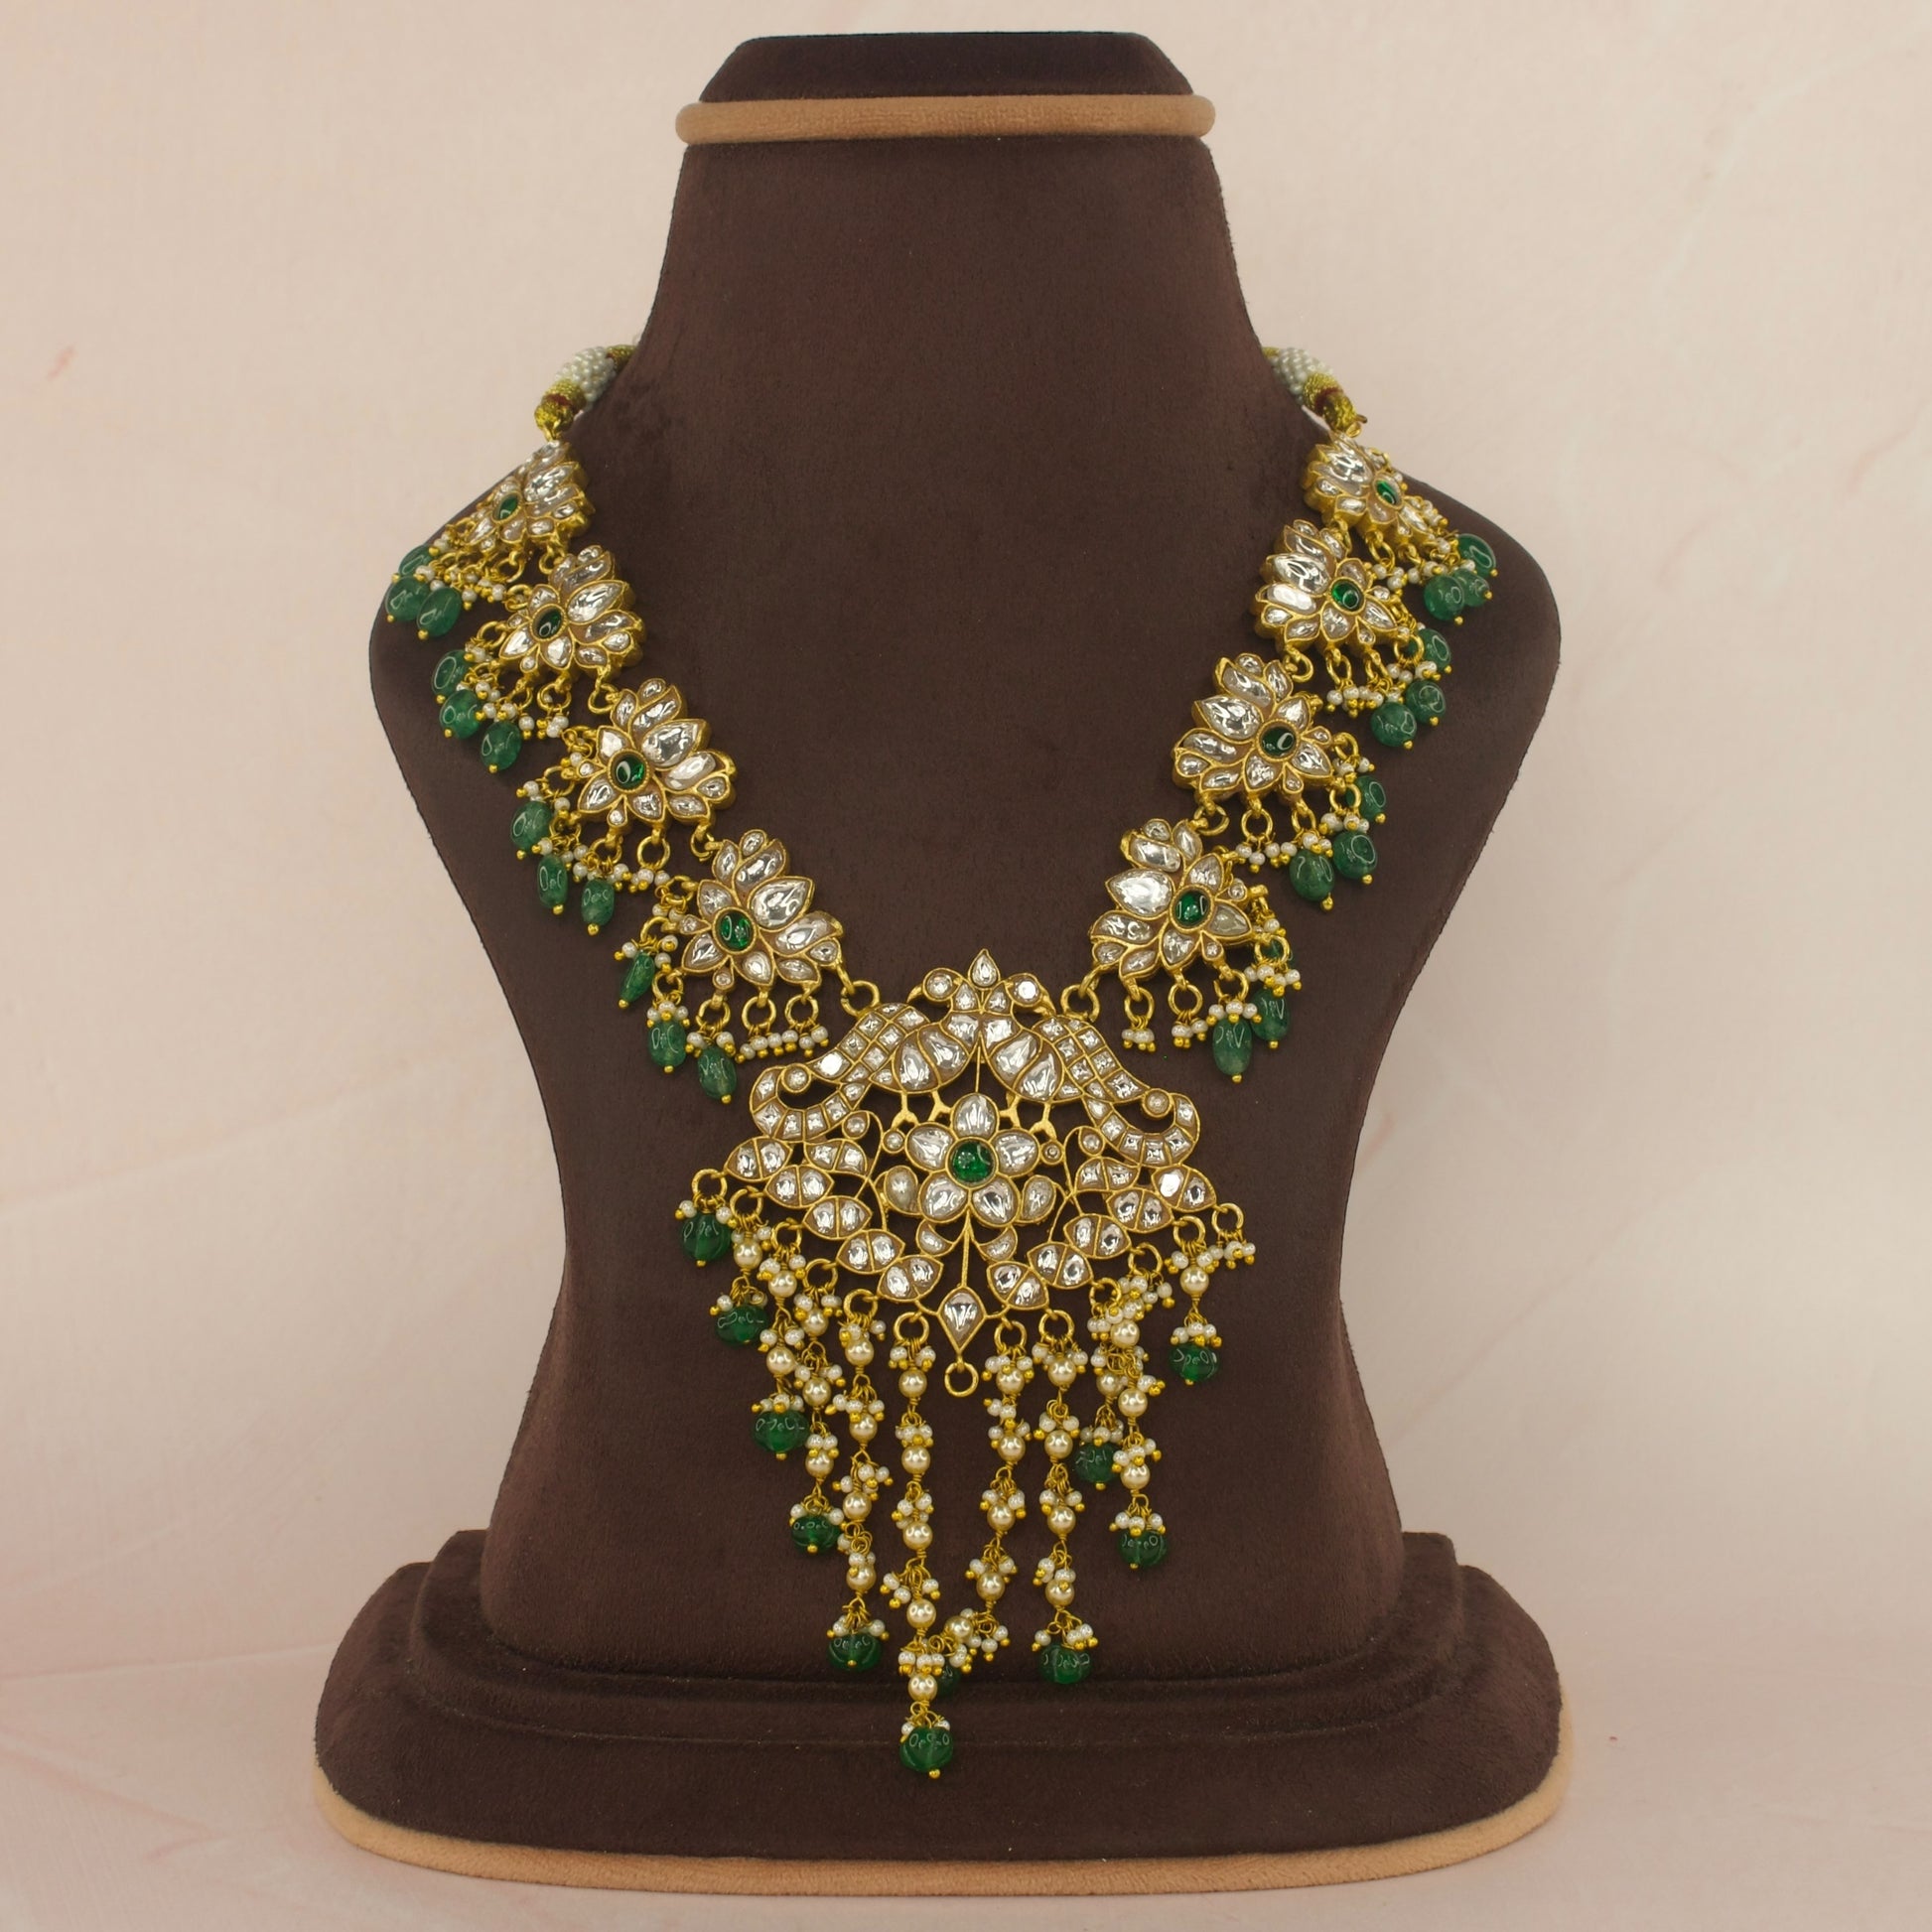 This is a Jadau Kundan Short Necklace, the Neckpiece has lotus designs all over it from the centre to the corners. This specific’s piece is with white Kundan stones and a singe green stone in the middle. The beads at bottom are Russian pumpkin beads.